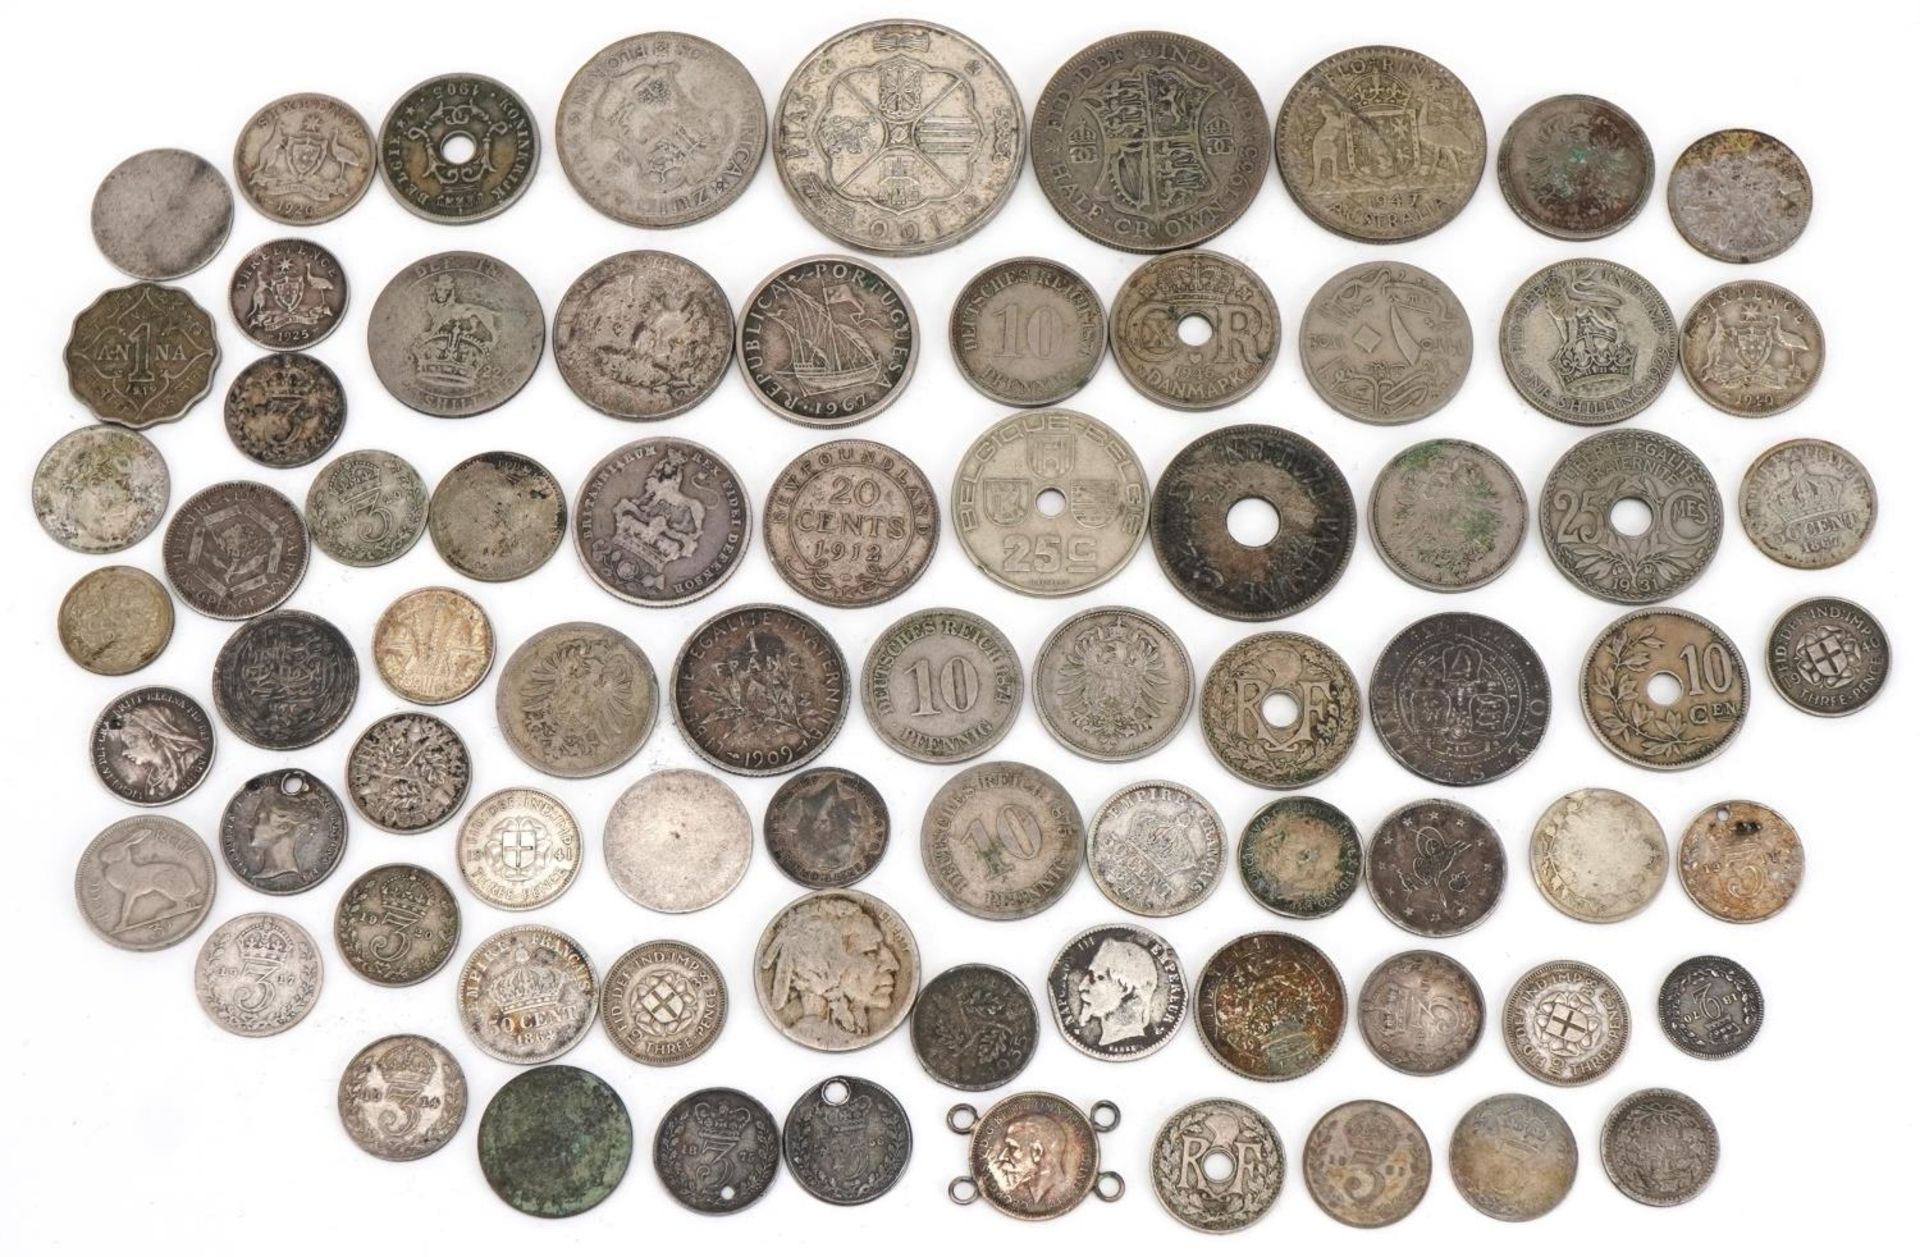 British and world coinage including one hundred ptas, half crowns and 1870 maundy twopence, 250g :